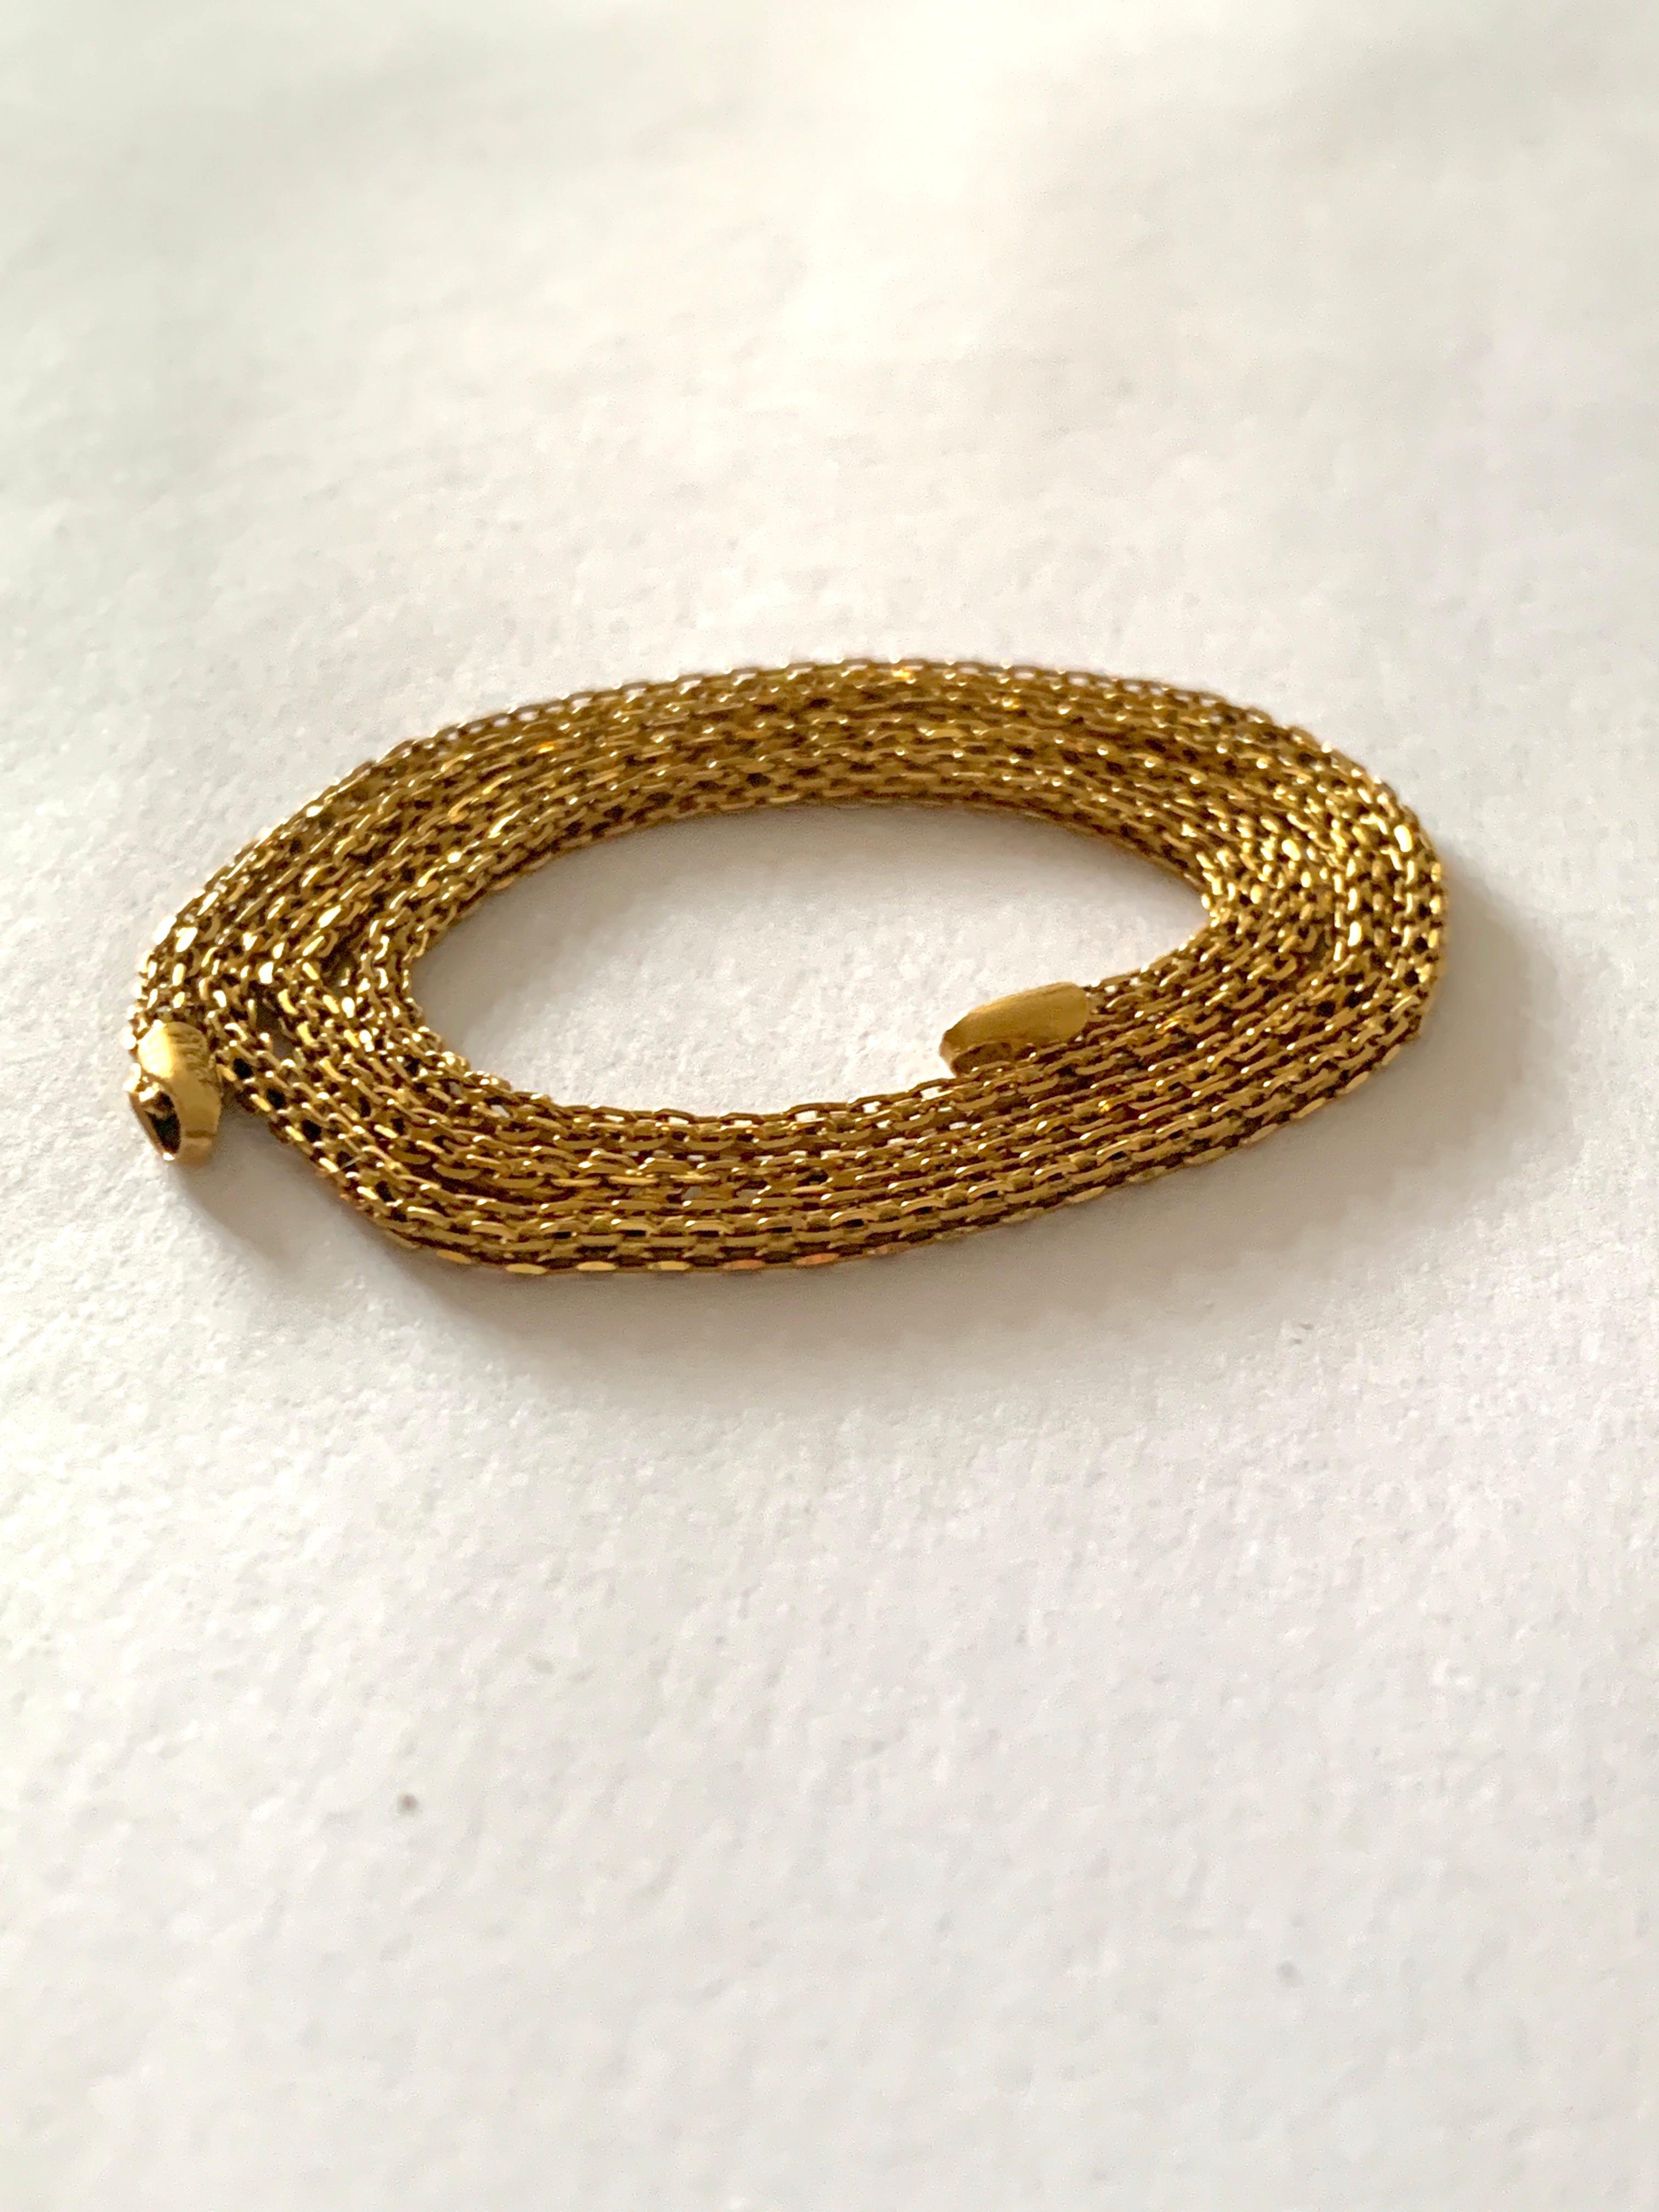 22ct 916 Gold Chain
Length 20.75 Inches
Thickness 3mm (millimeters)
Weight 13.35 grams

Please note - Chain is without a clasp.

Fully Hallmarked by London Assay Offices

